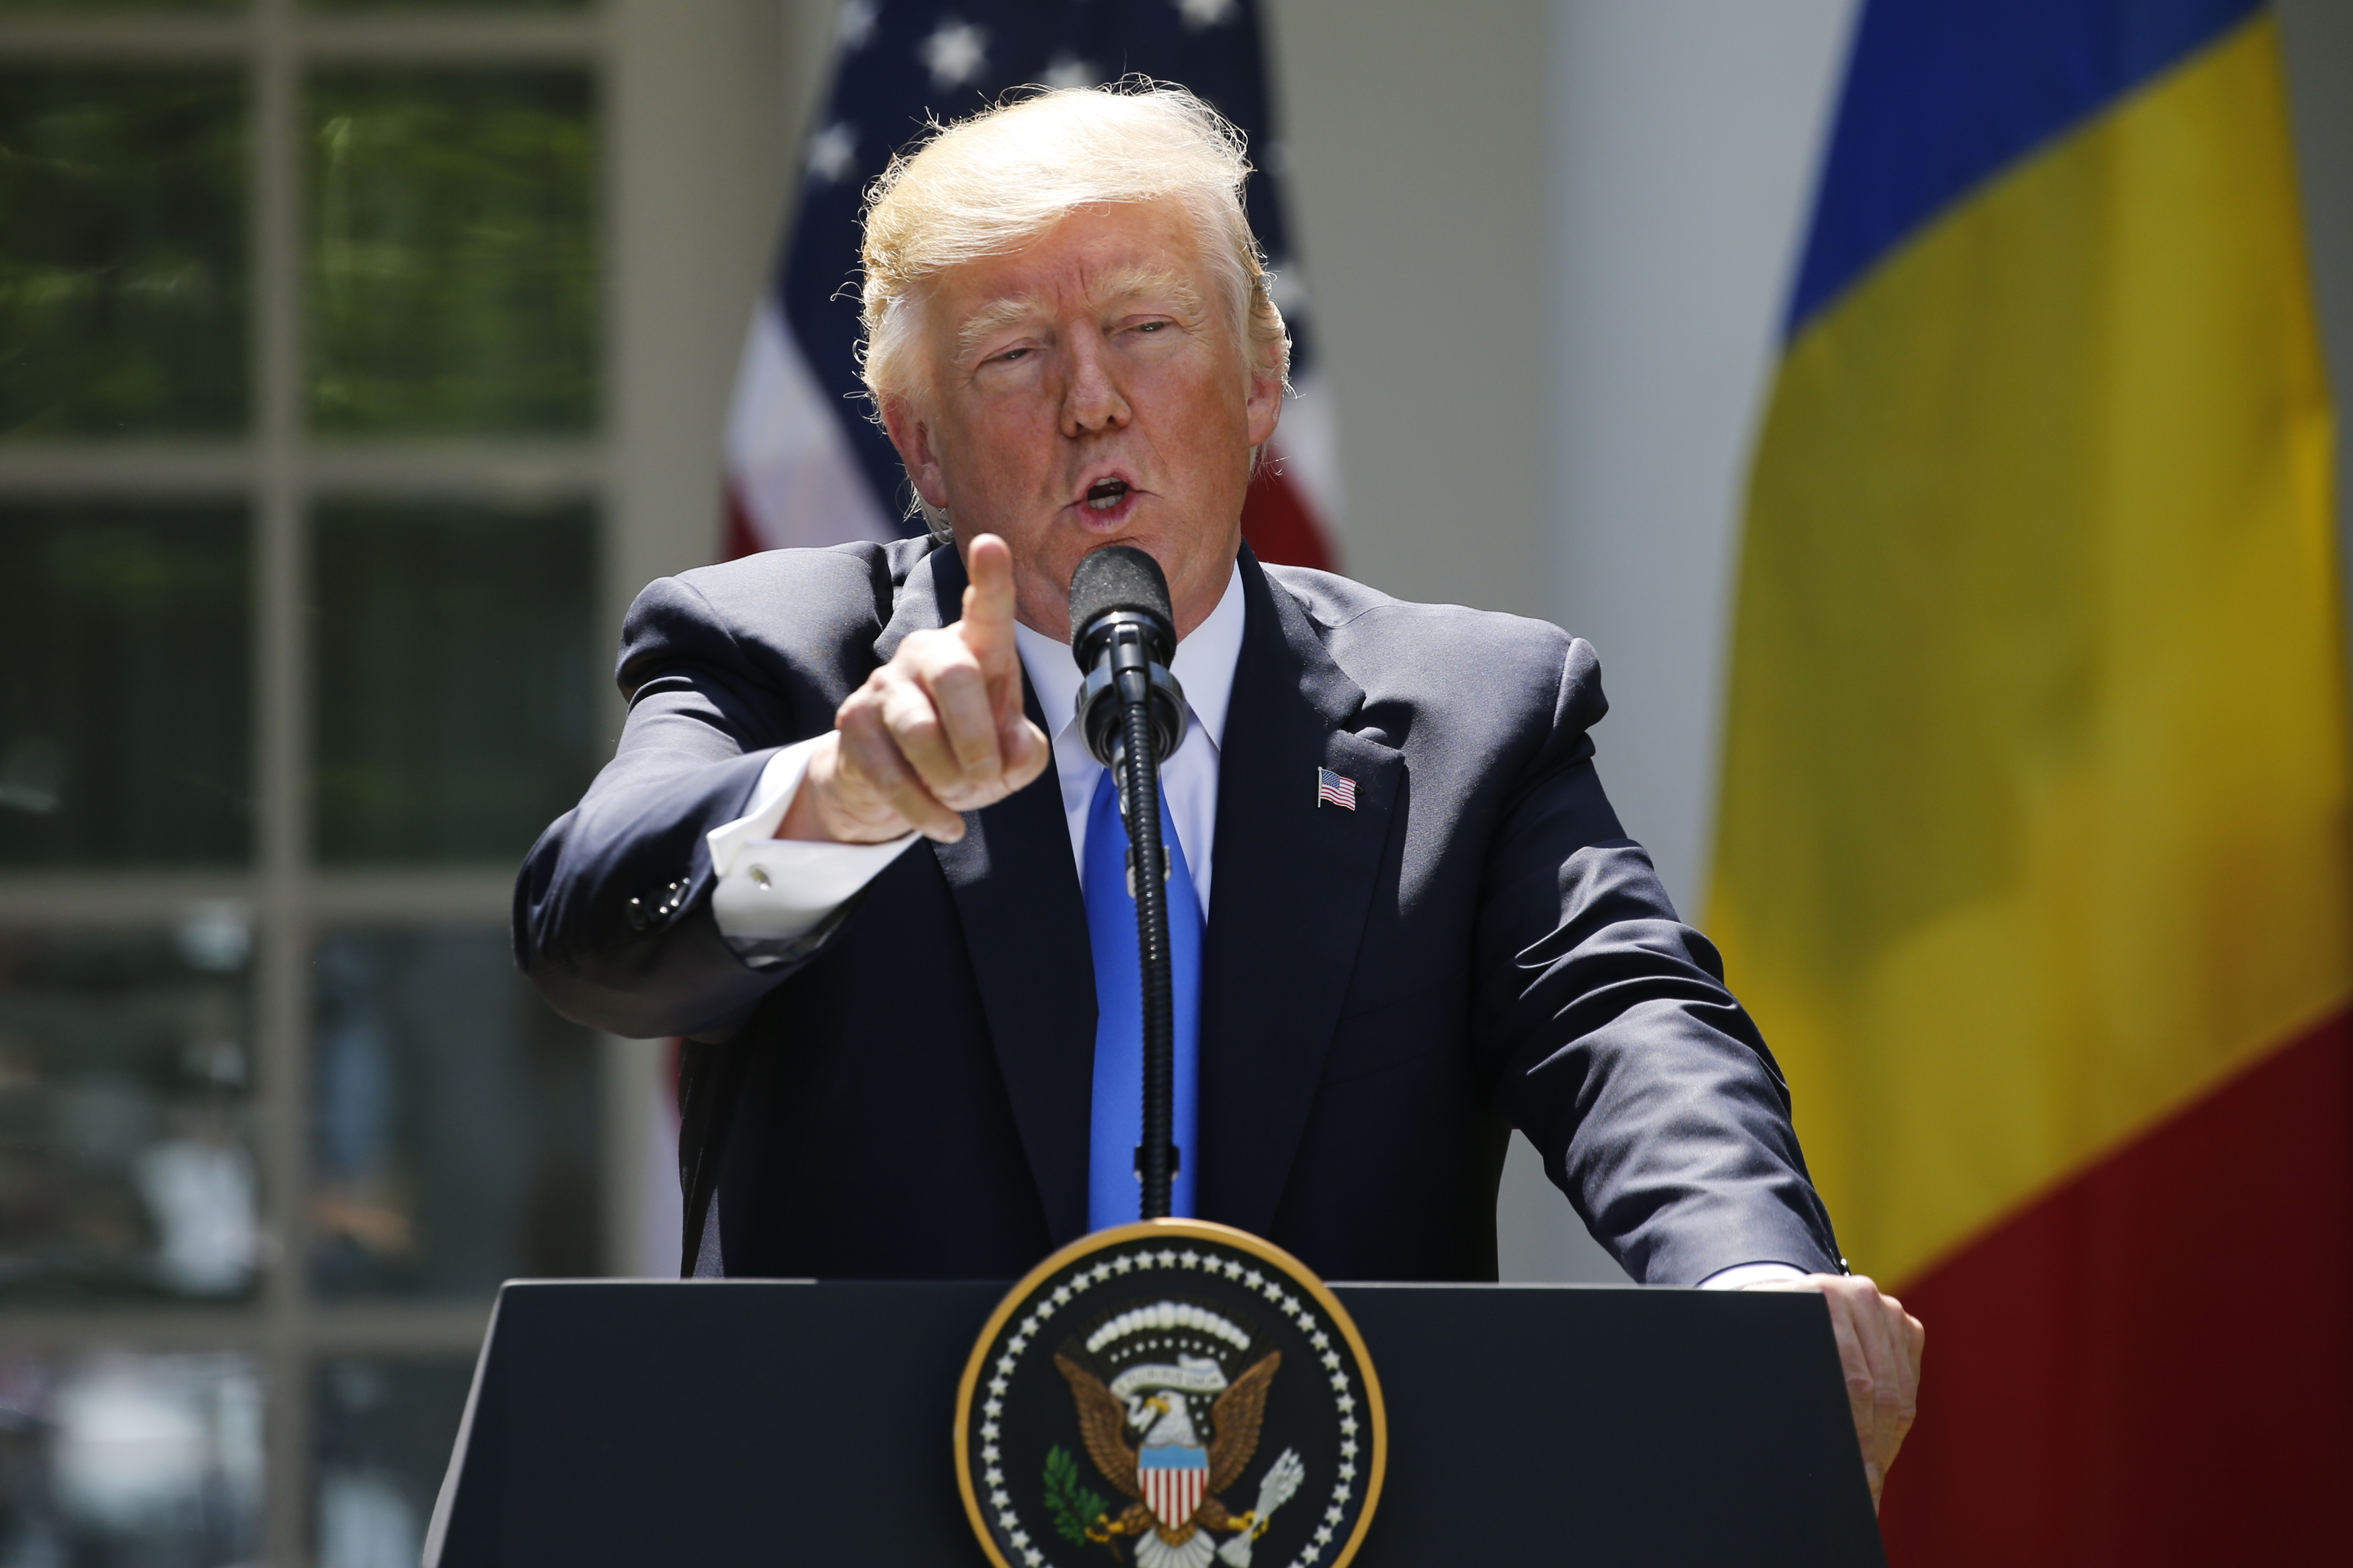 U.S. President Donald Trump reacts to a reporter's question during a joint news conference with Romanian President Klaus Iohannis in the Rose Garden at the White House in Washington, June 9, 2017. (Jonathan Ernst—Reuters)